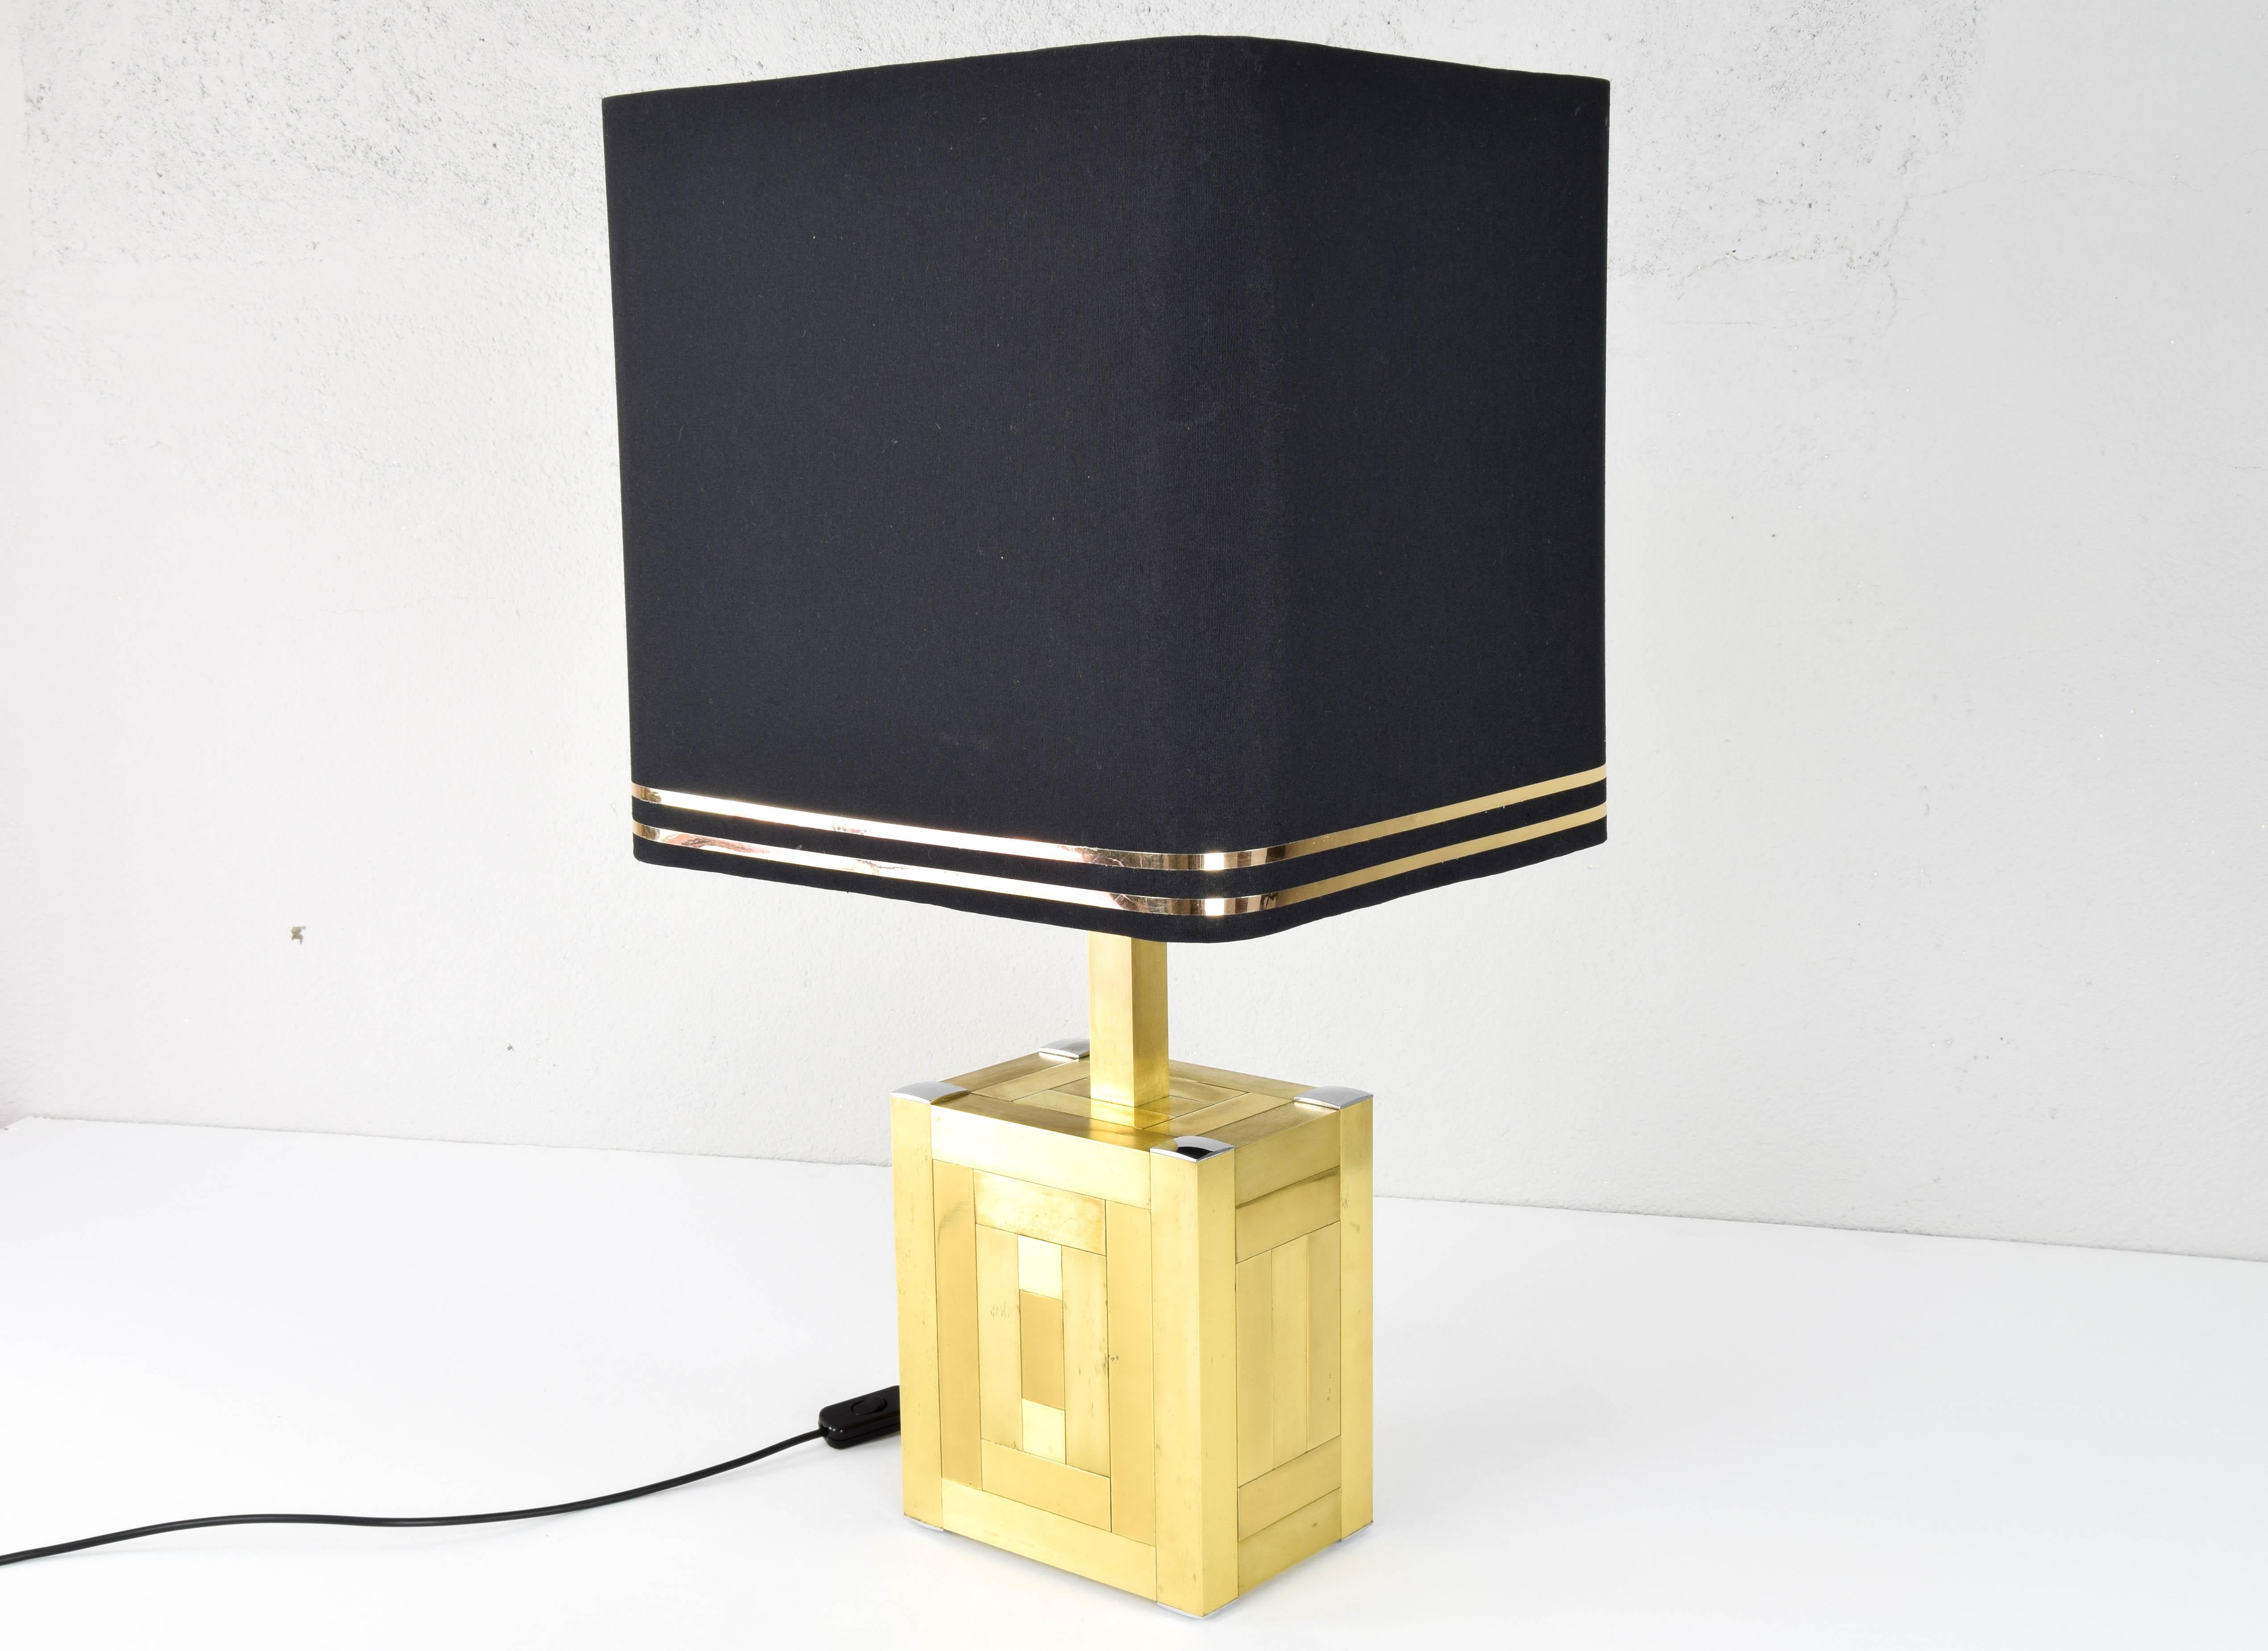 Sculptural cubic Hollywood Regency table lamp manufactured by the Lumica company in the 70s.
Cube composed of rectangular bars with a glossy brass finish and a polished brass finish. 
As can be seen in the images, the brassing shows some signs of